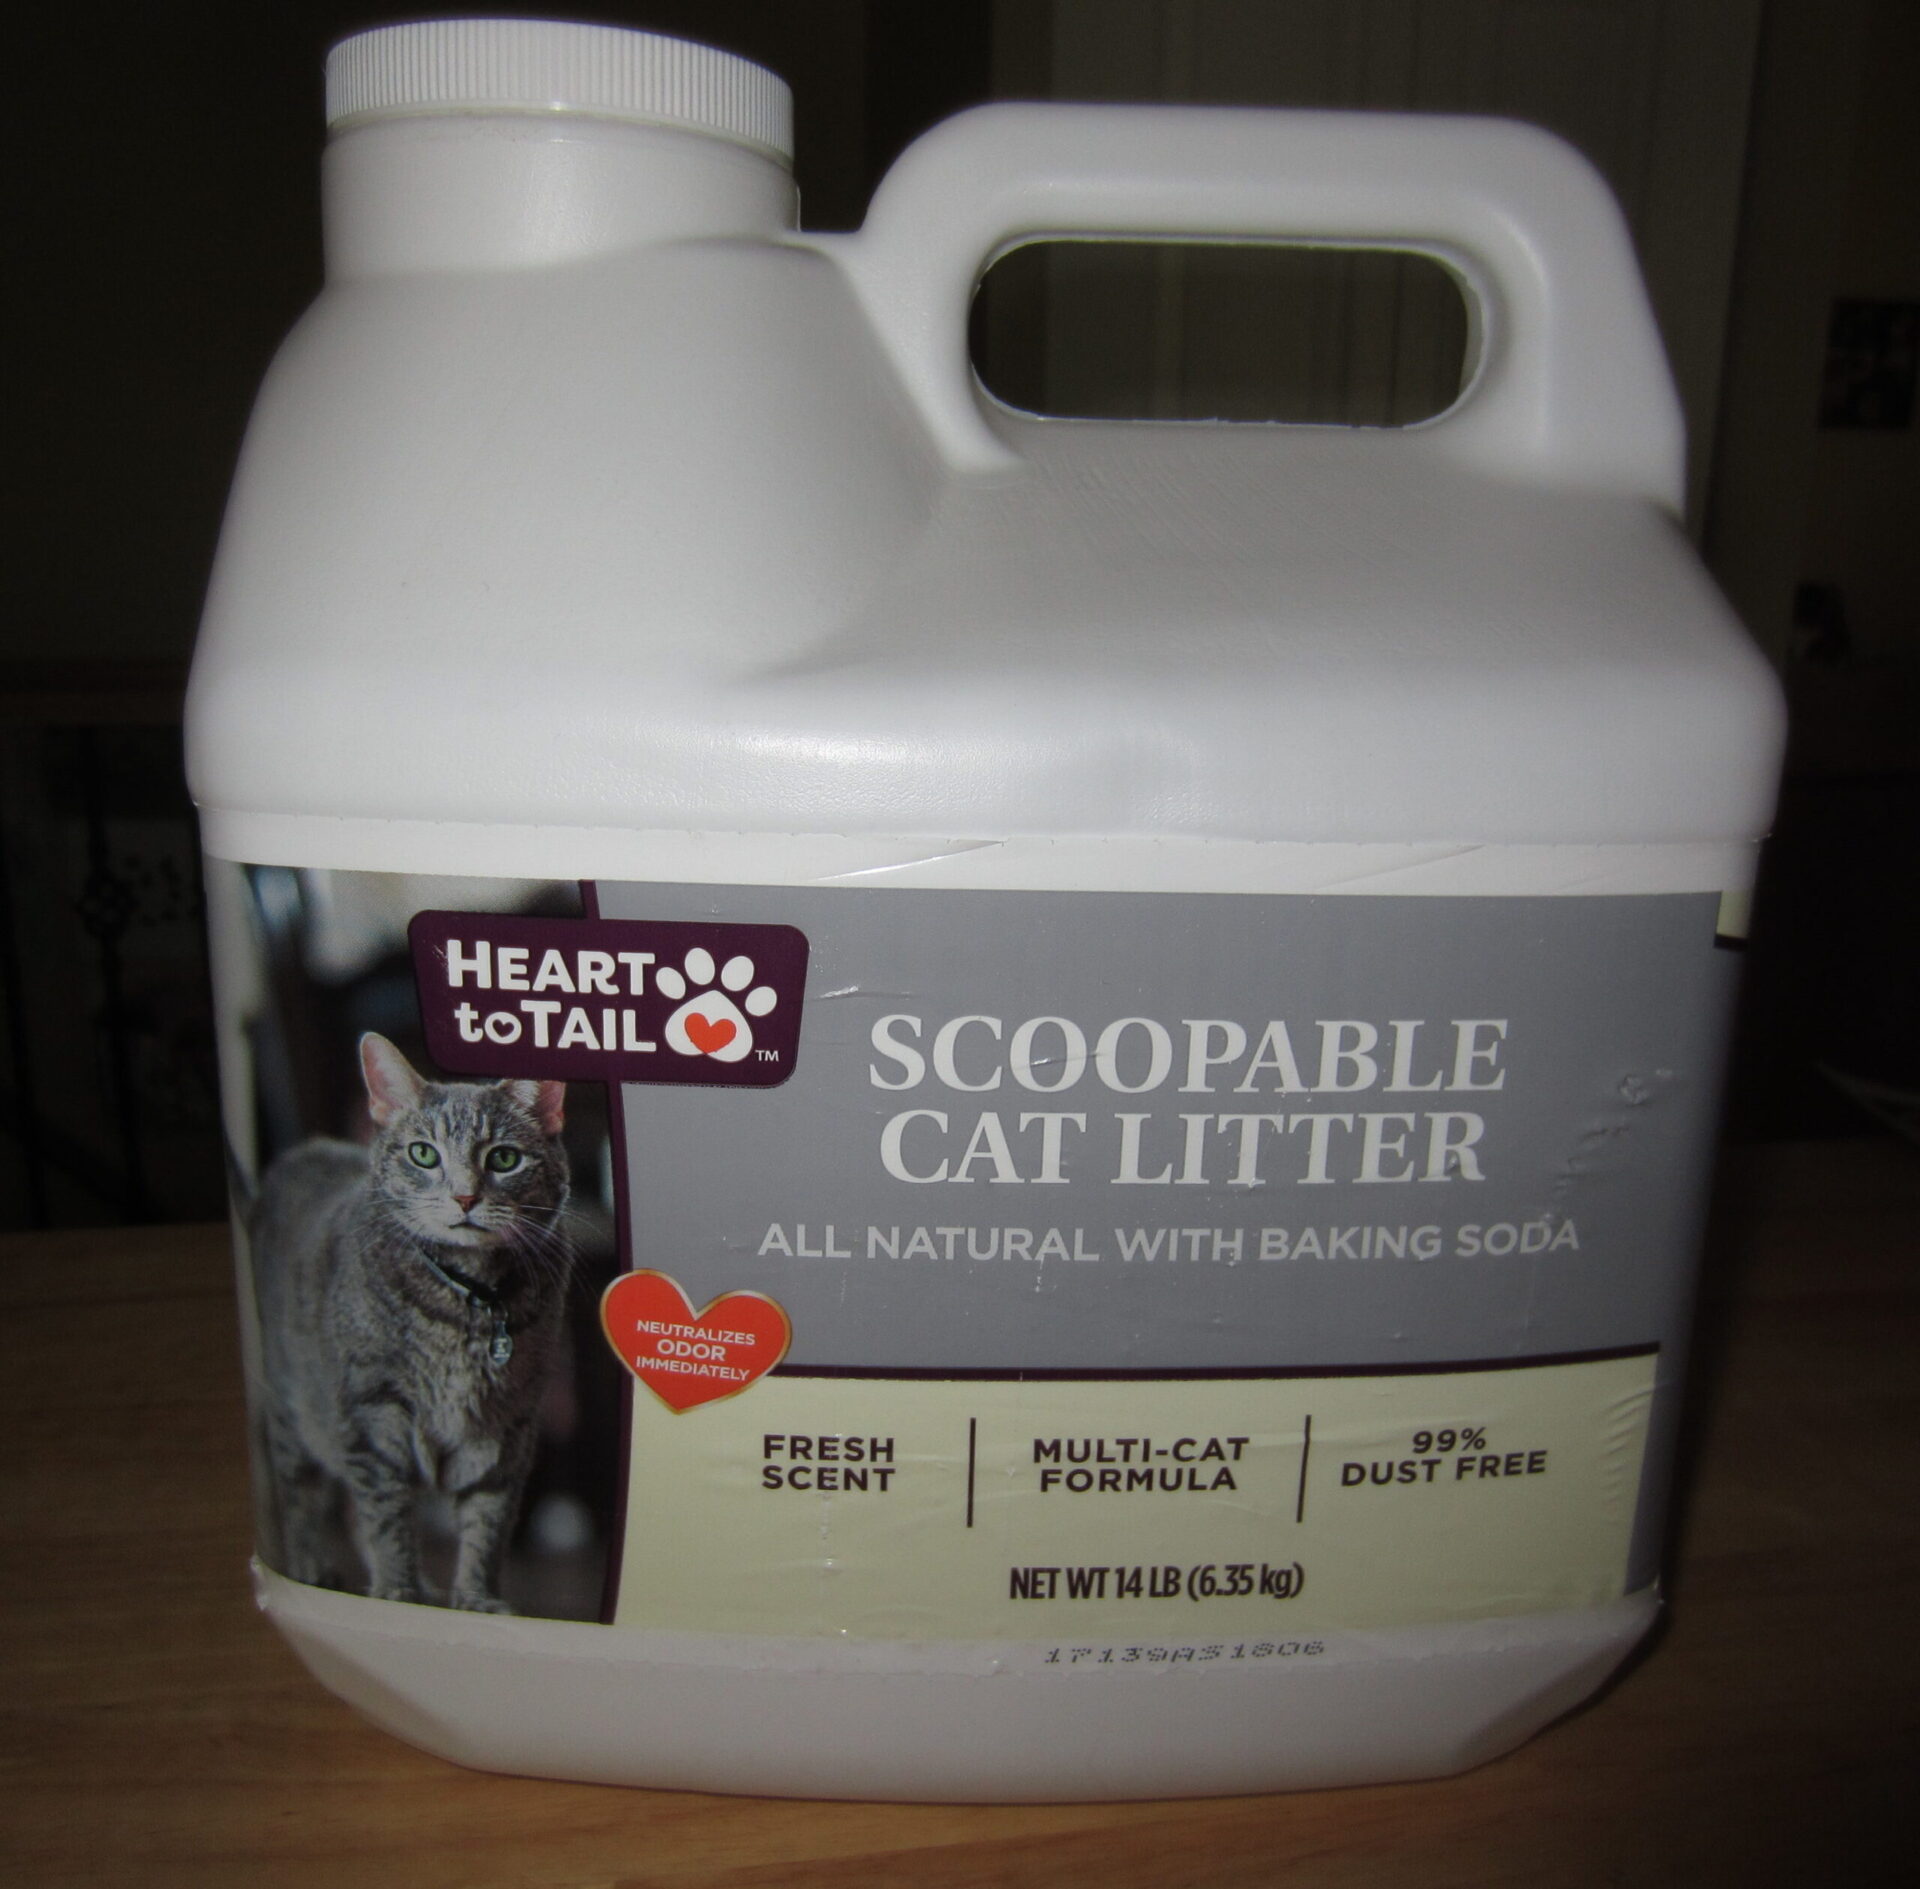 Heart to Tail Scoopable Cat Litter